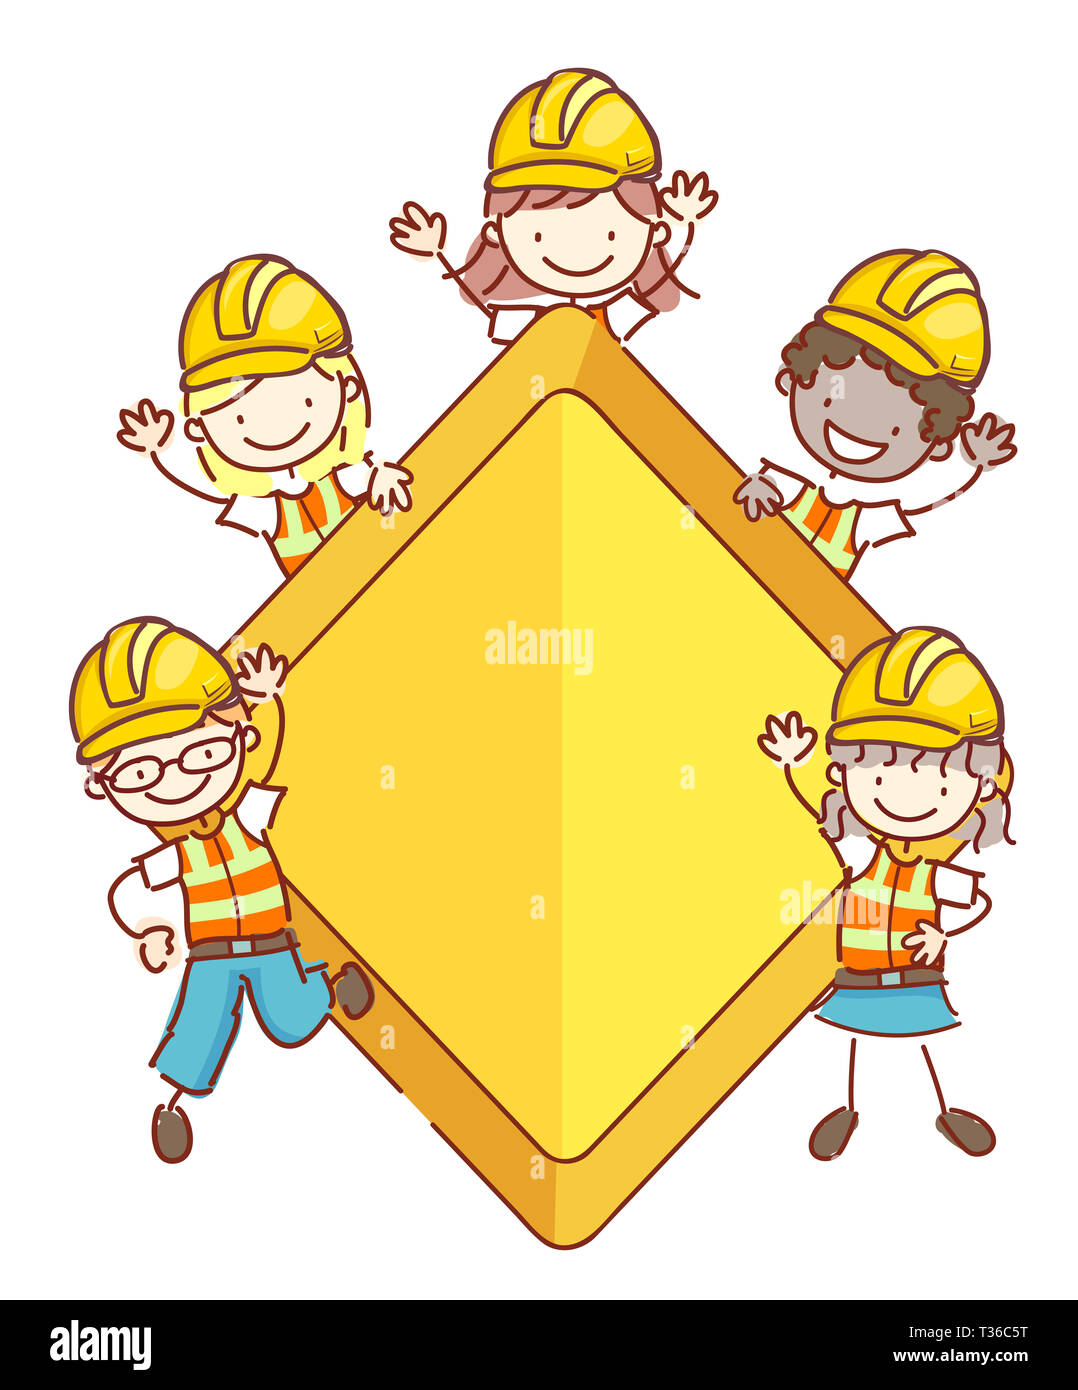 Illustration of Stickman Kids Wearing Yellow Hard Hats and Vests Standing with a Blank Construction Sign or Board Stock Photo